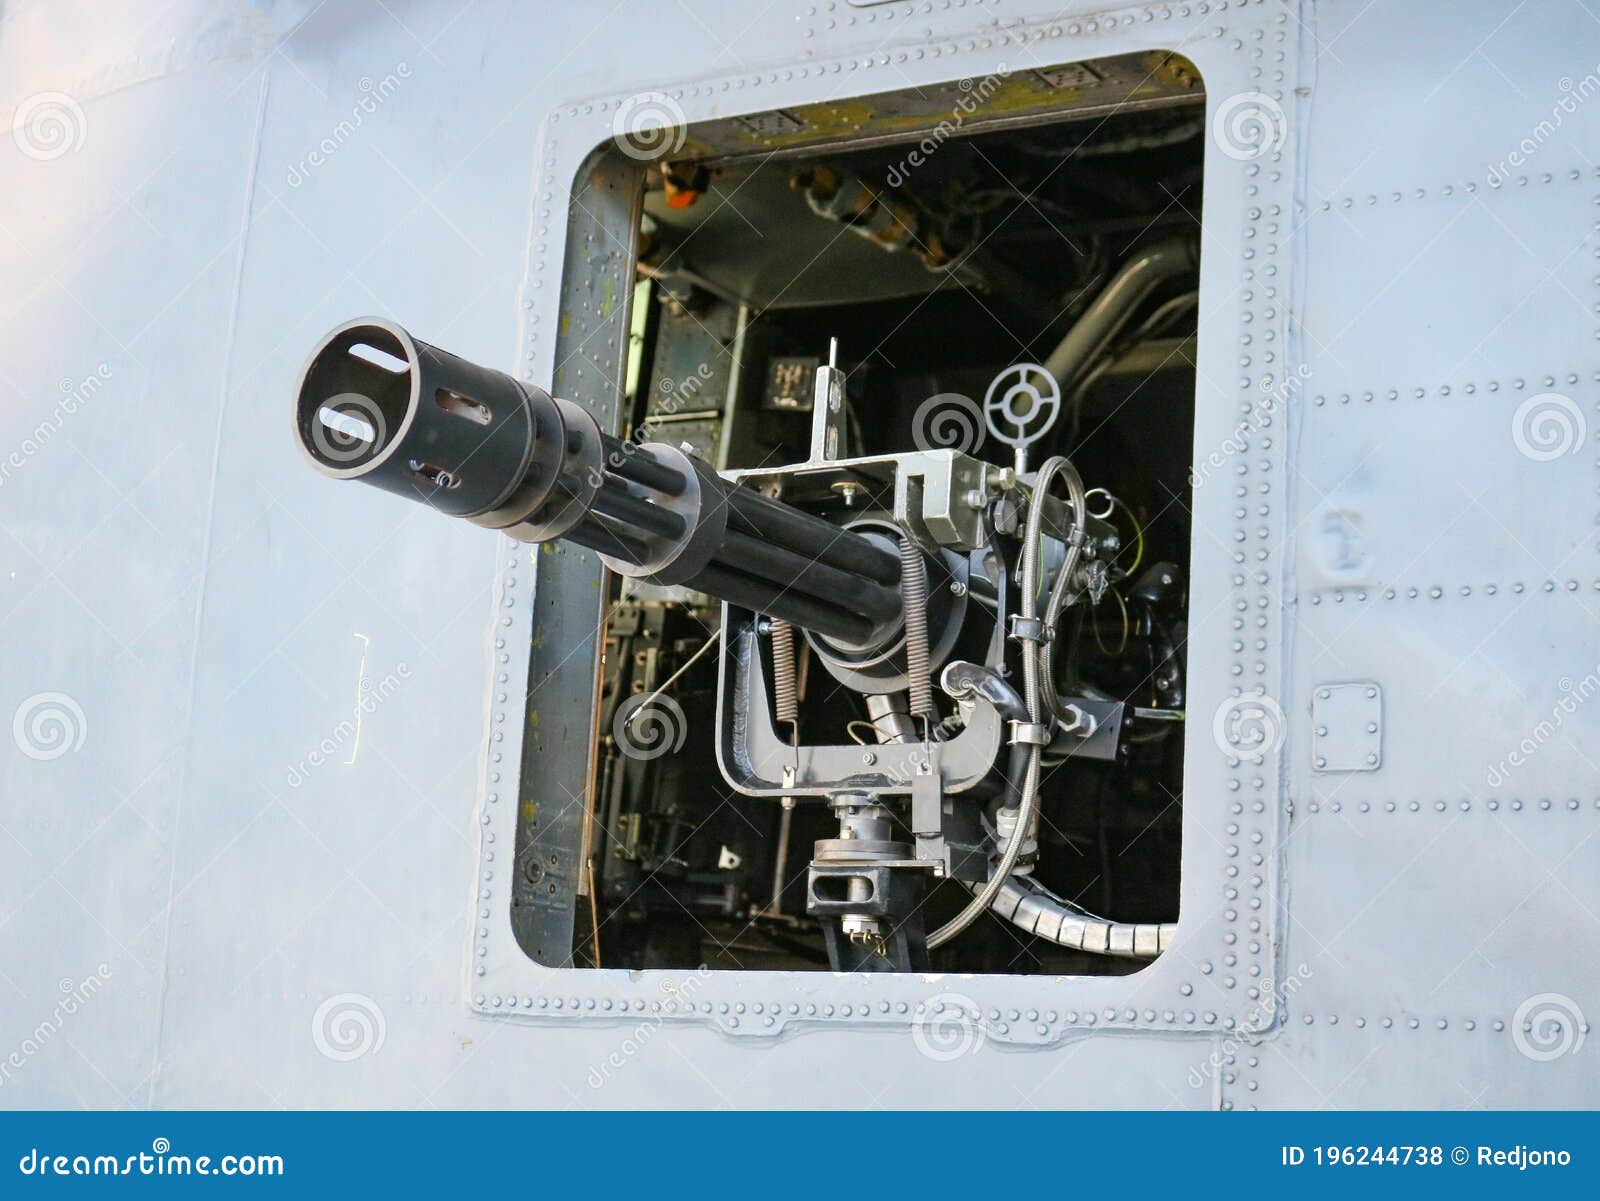 machine gun on mh-53m sikorsky pave low